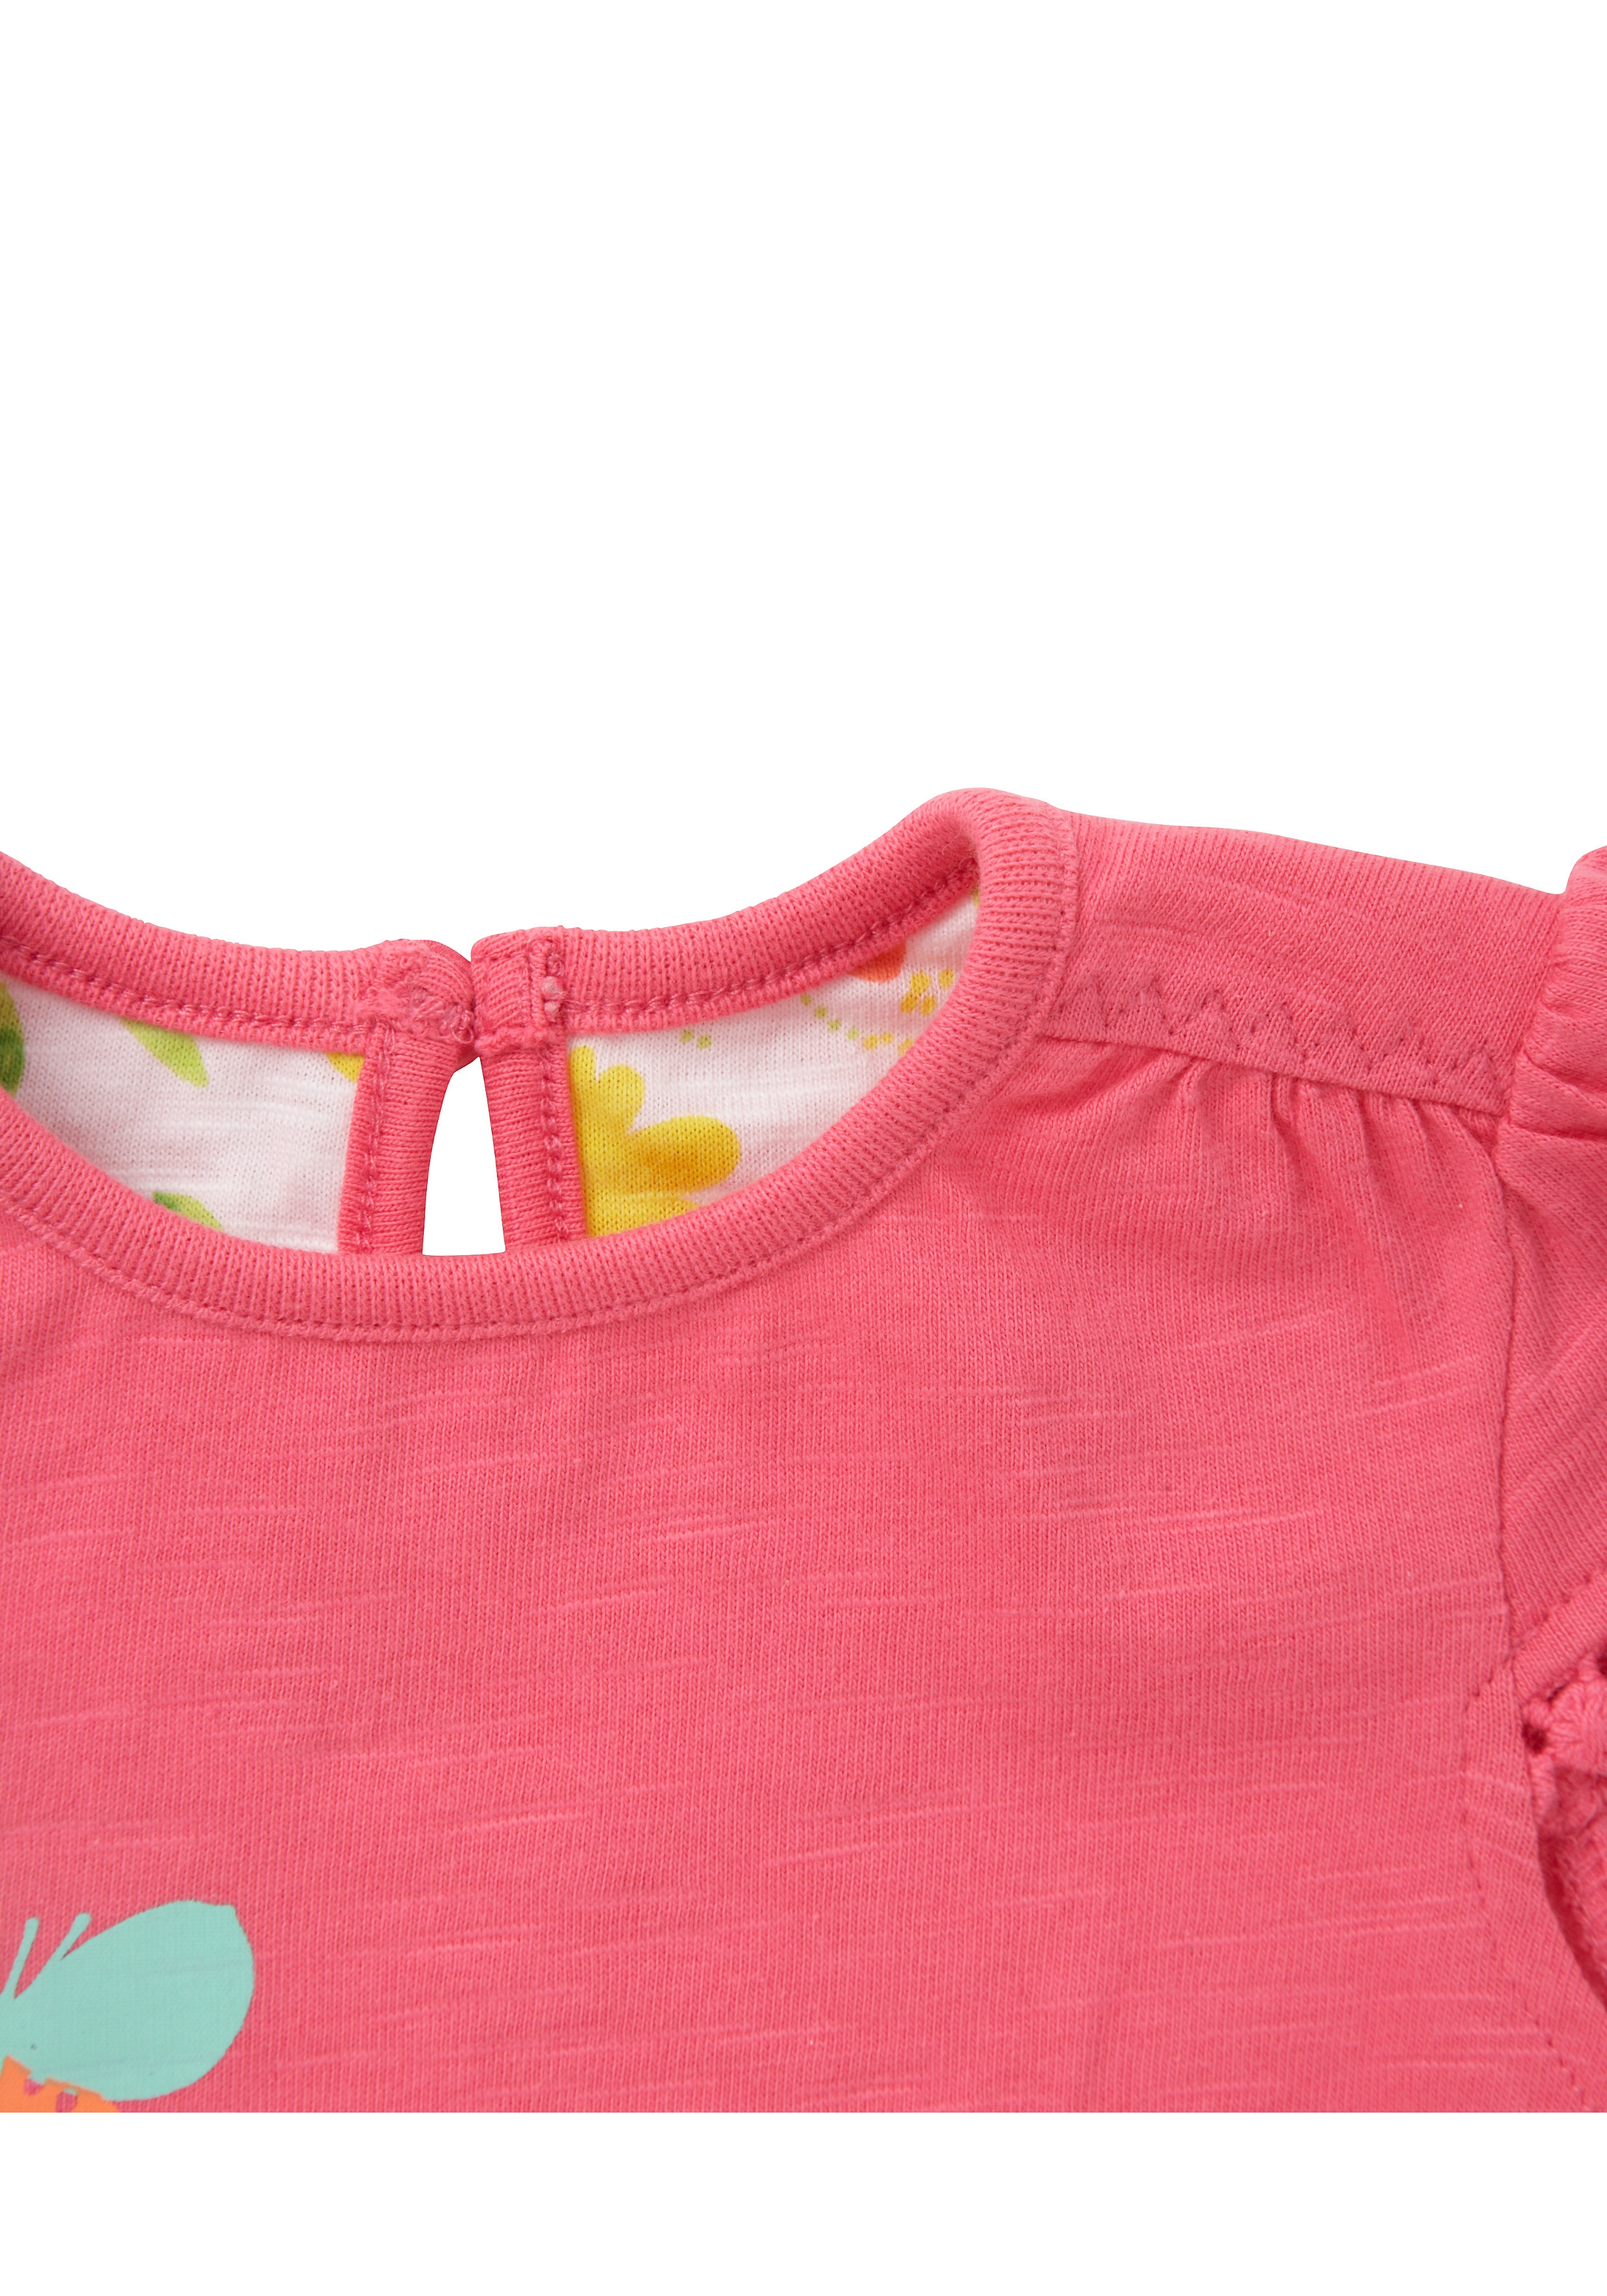 Mothercare | Girls Bright Floral Jersey T-Shirt - Pink 2